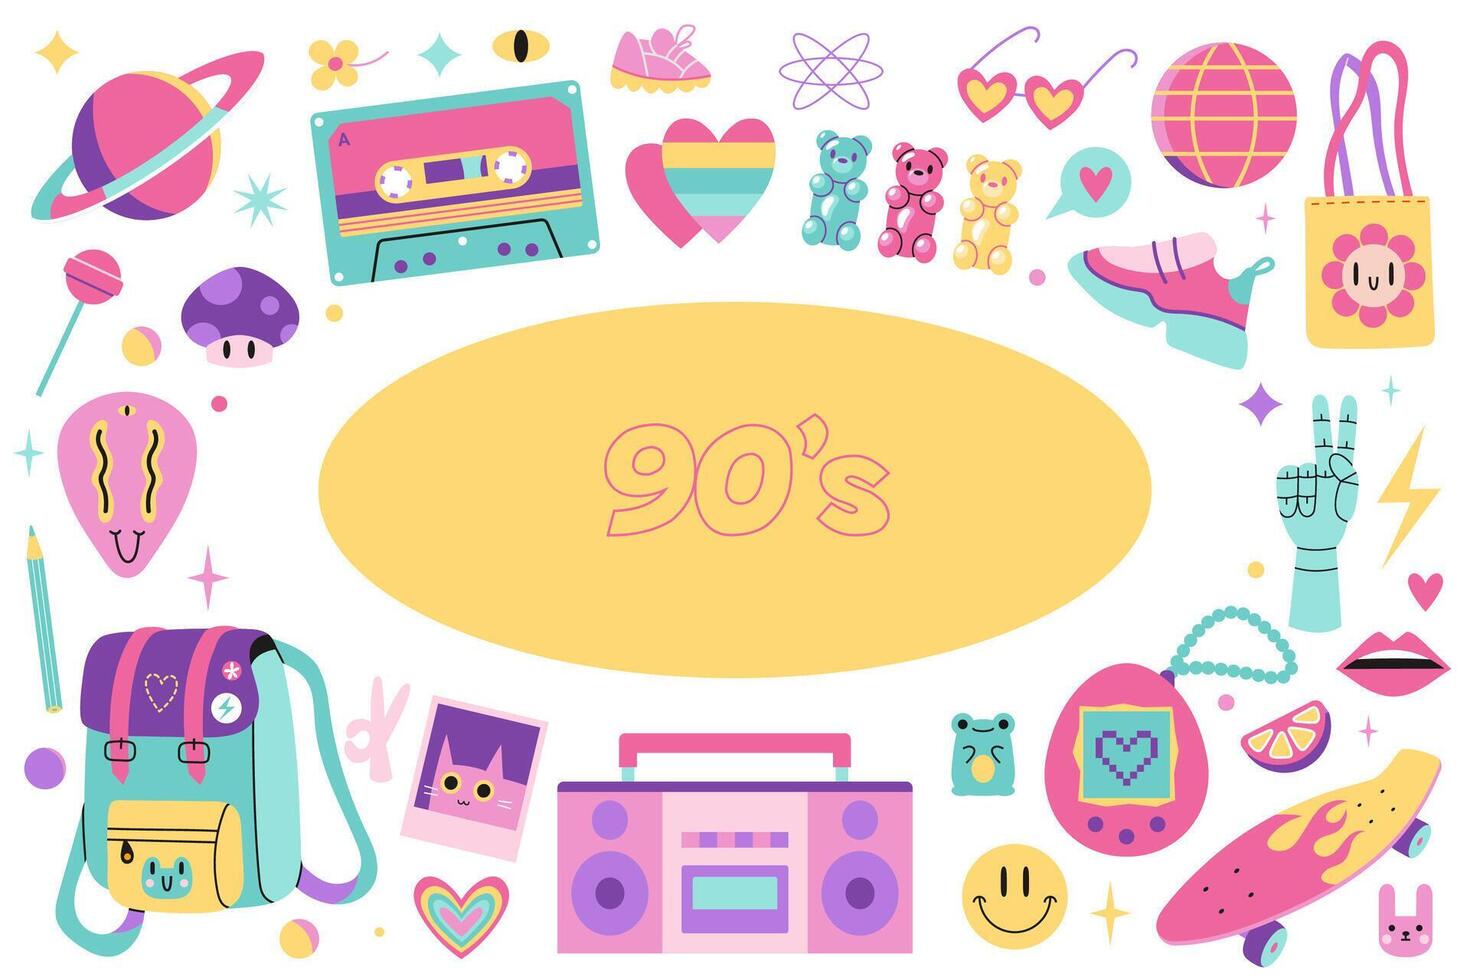 90s retro elements set, cartoon illustration. Vintage nineties vibes aesthetic in modern style, bright pastel color. Trendy modern art isolated on white background, hand drawn, flat design vector